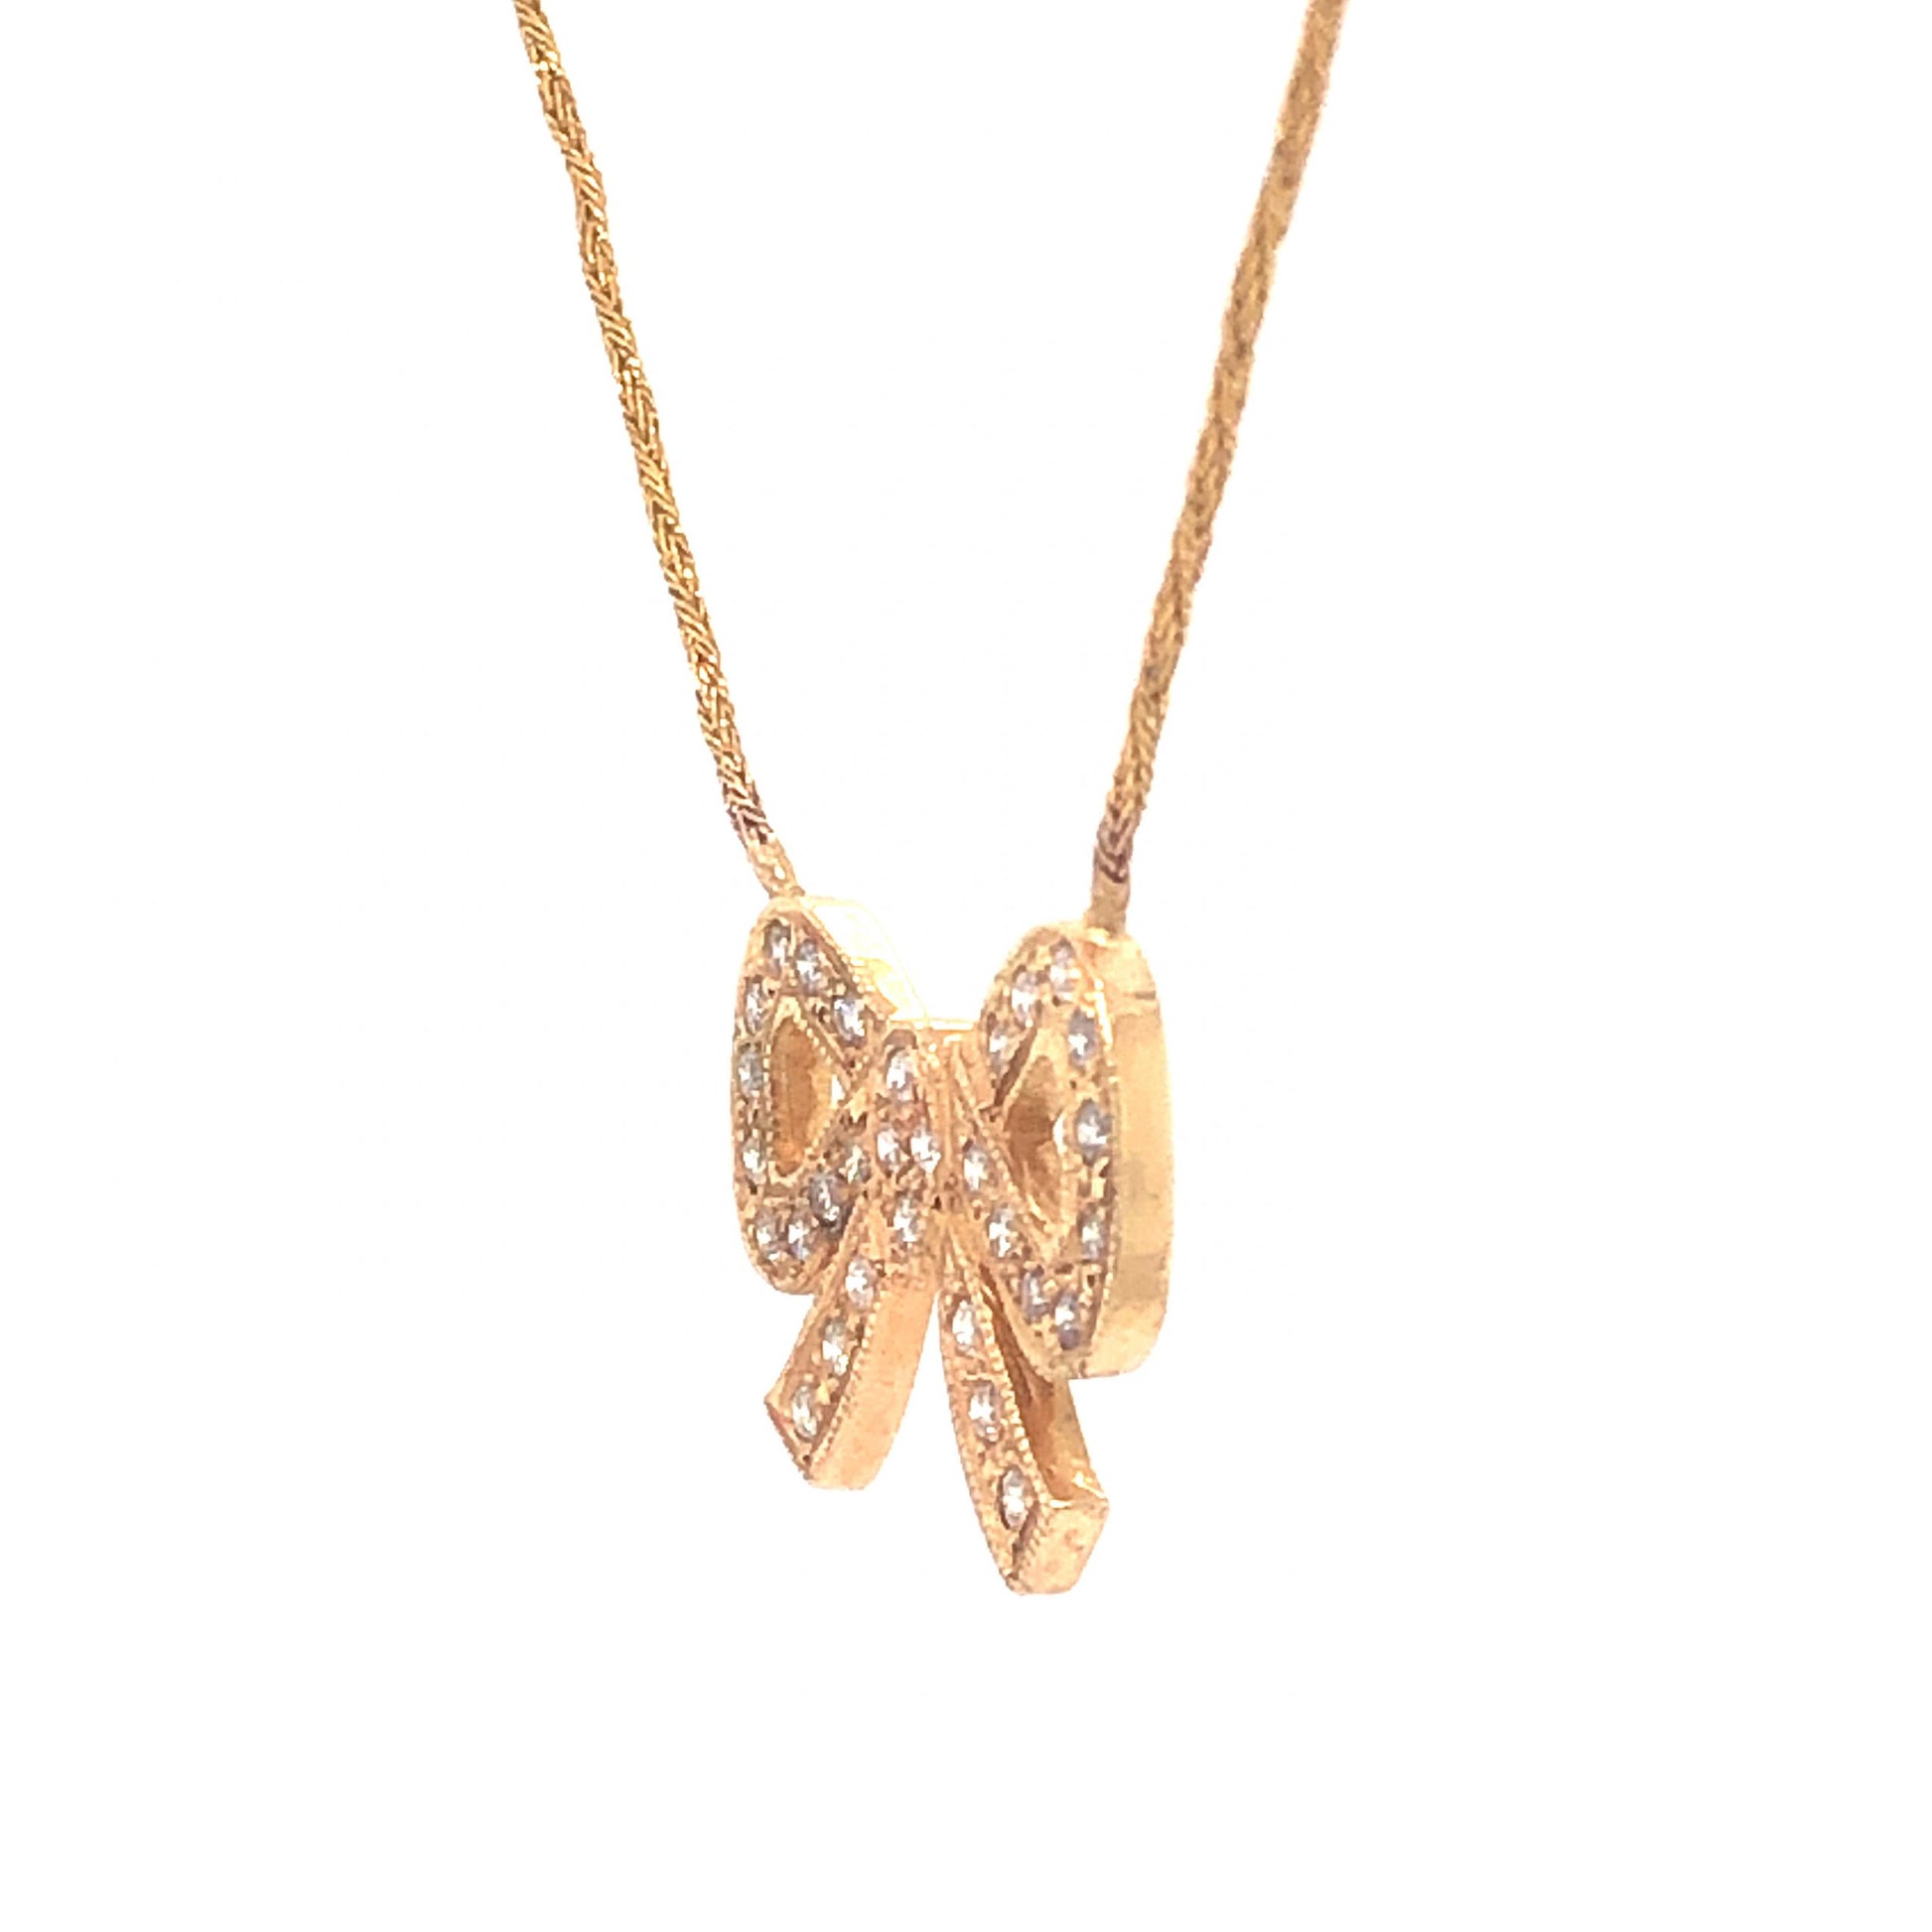 Diamond Bow Pendant Necklace in 10K Yellow Gold